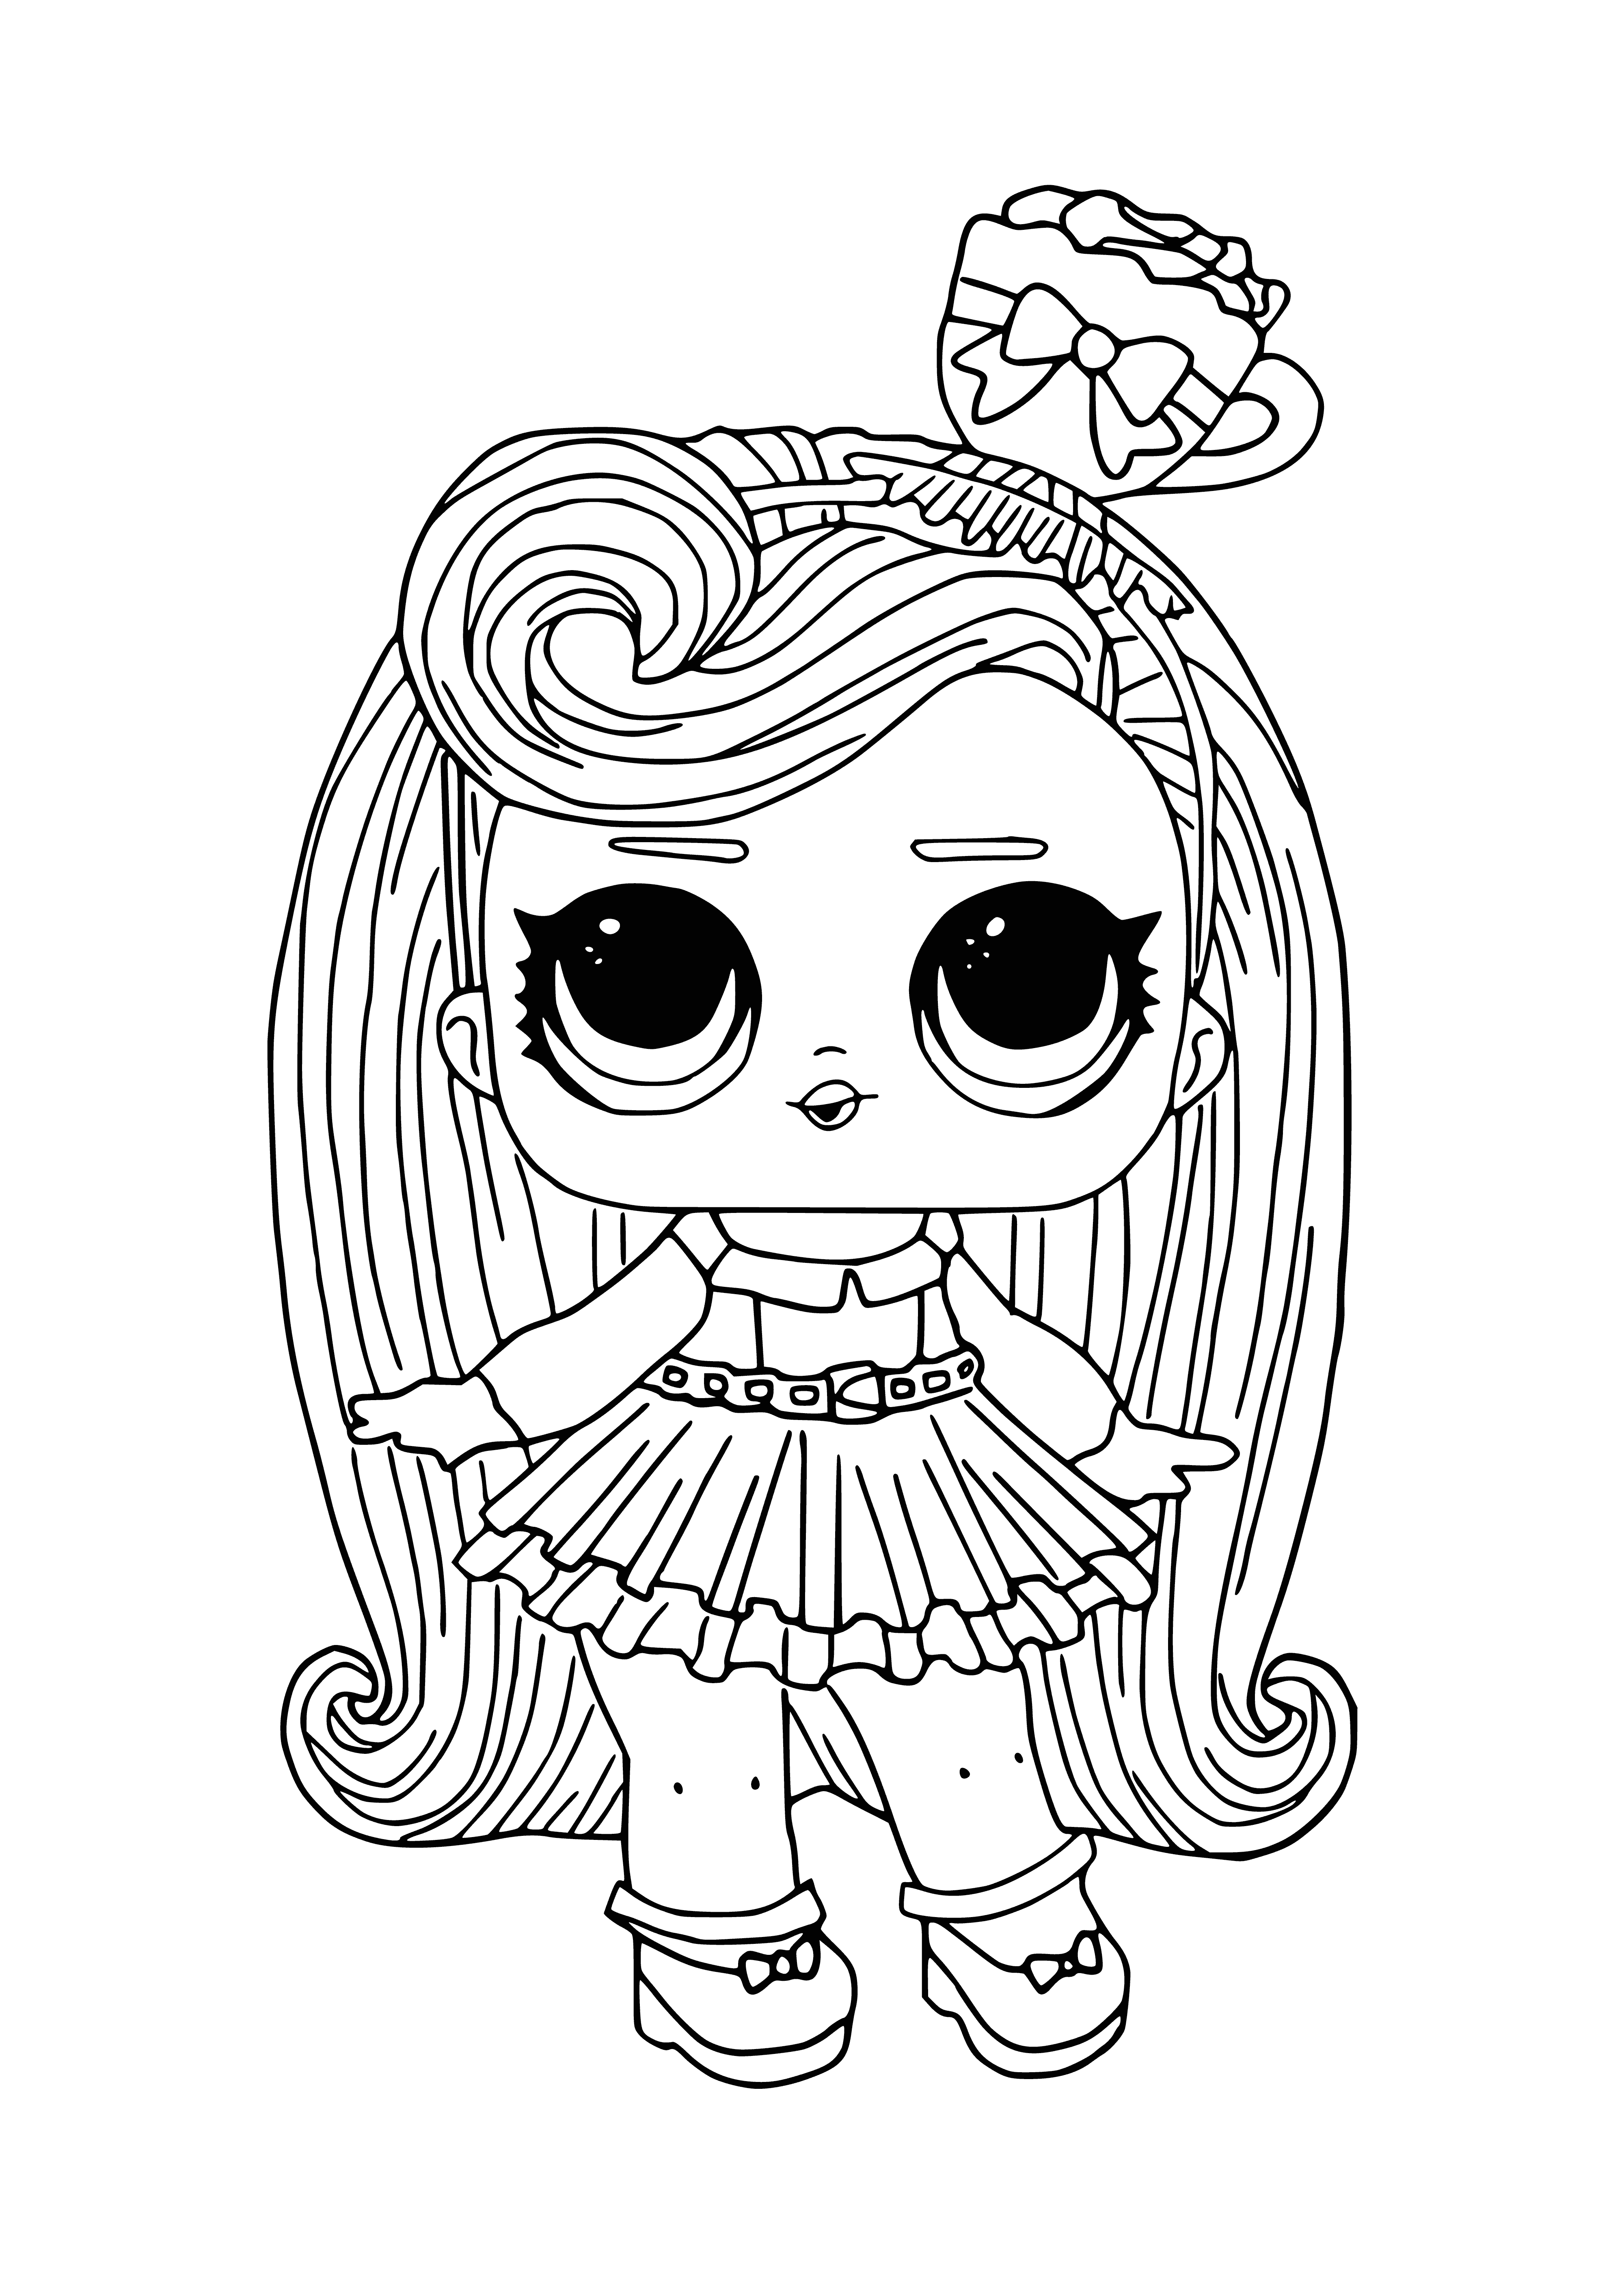 coloring page: Girl in pink dress holds baby doll, smiling happily.